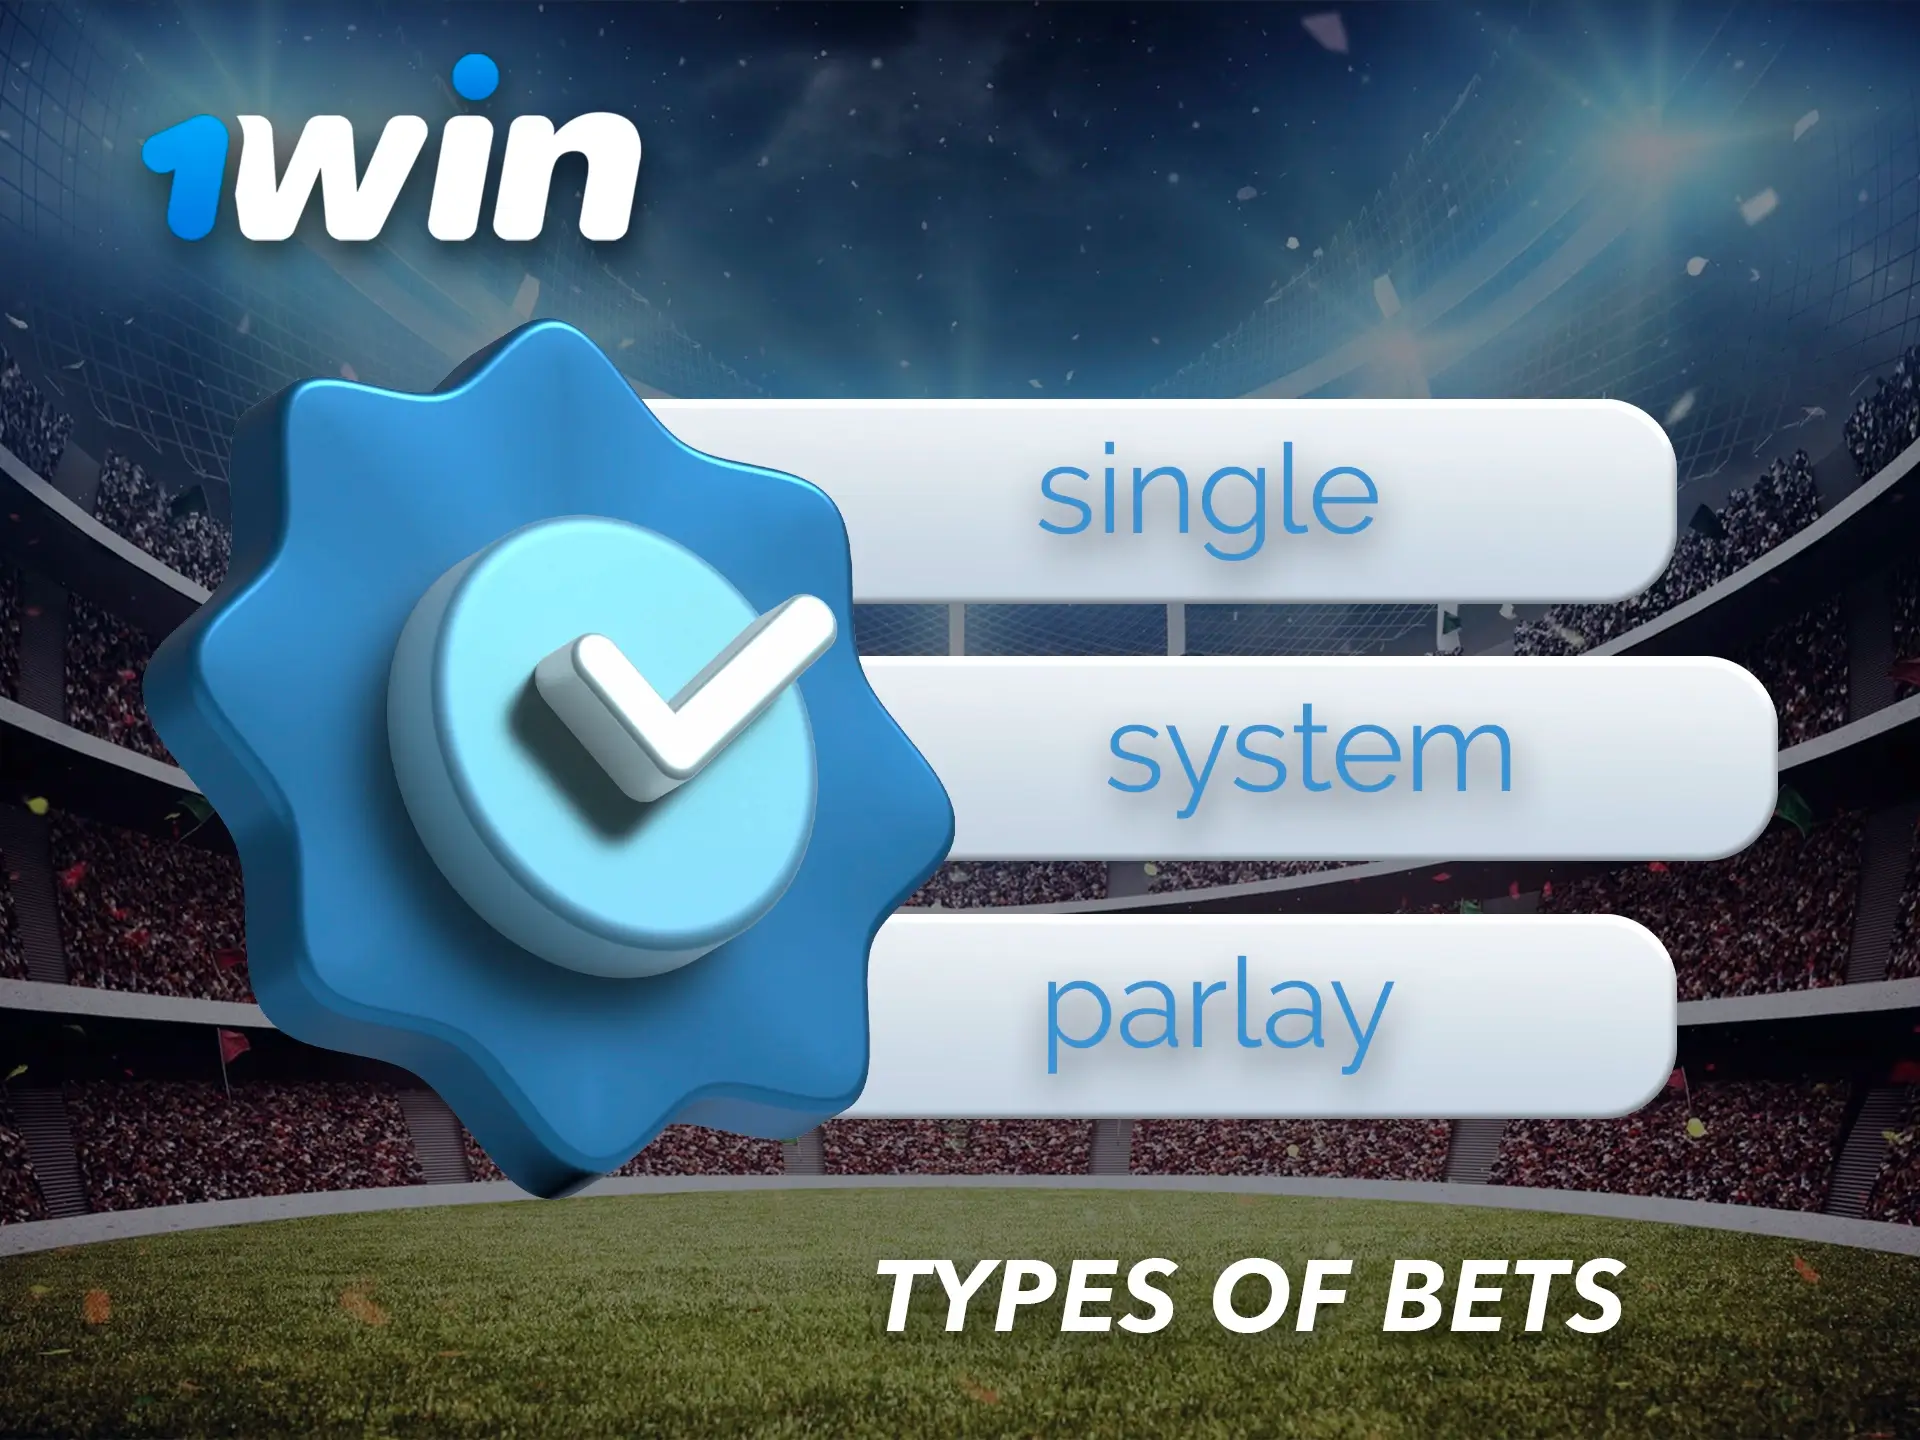 Different types of bets allow you to play intelligently and win with 1Win.